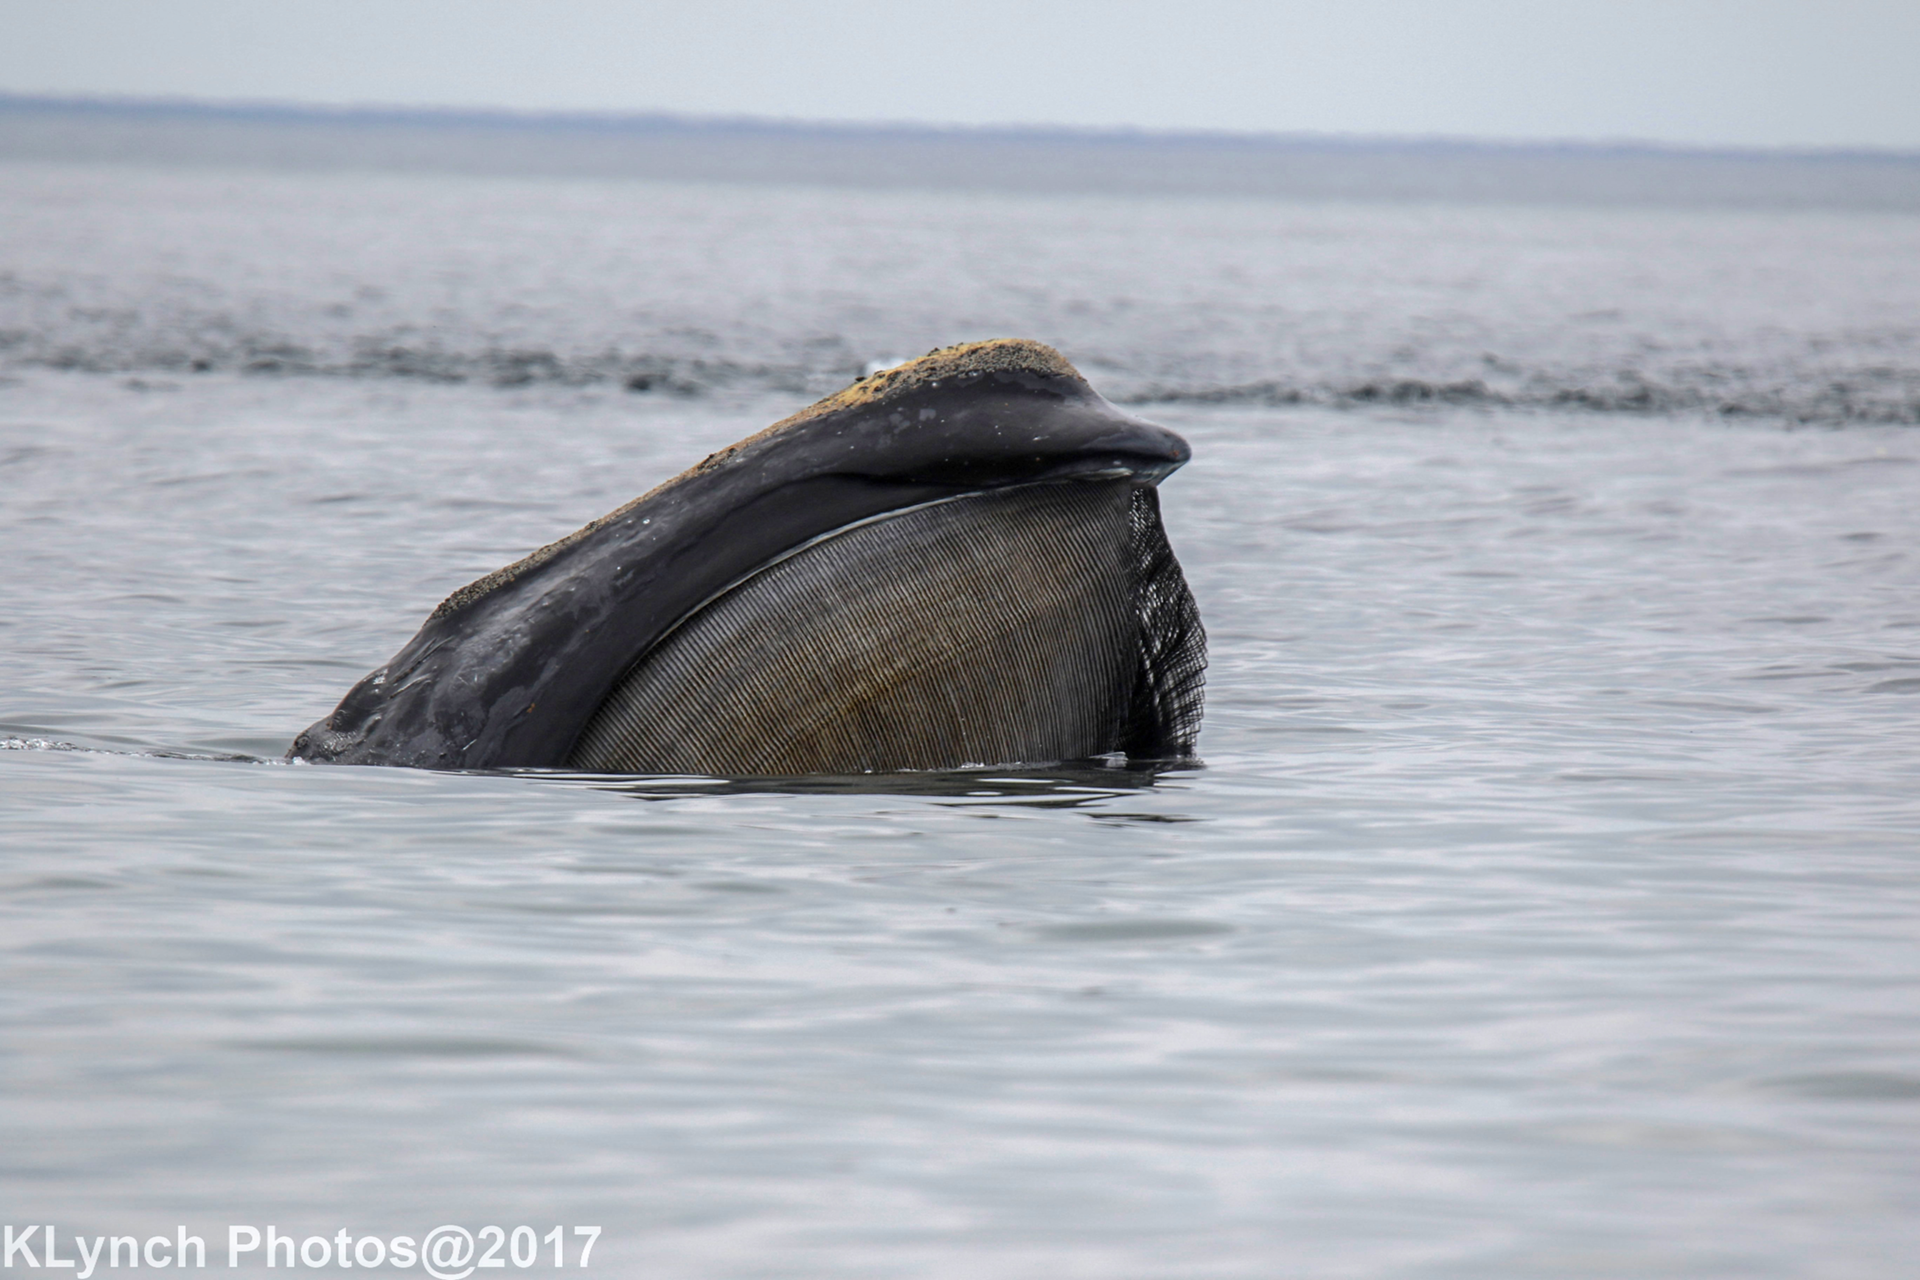 A whale poking its nose out of the water